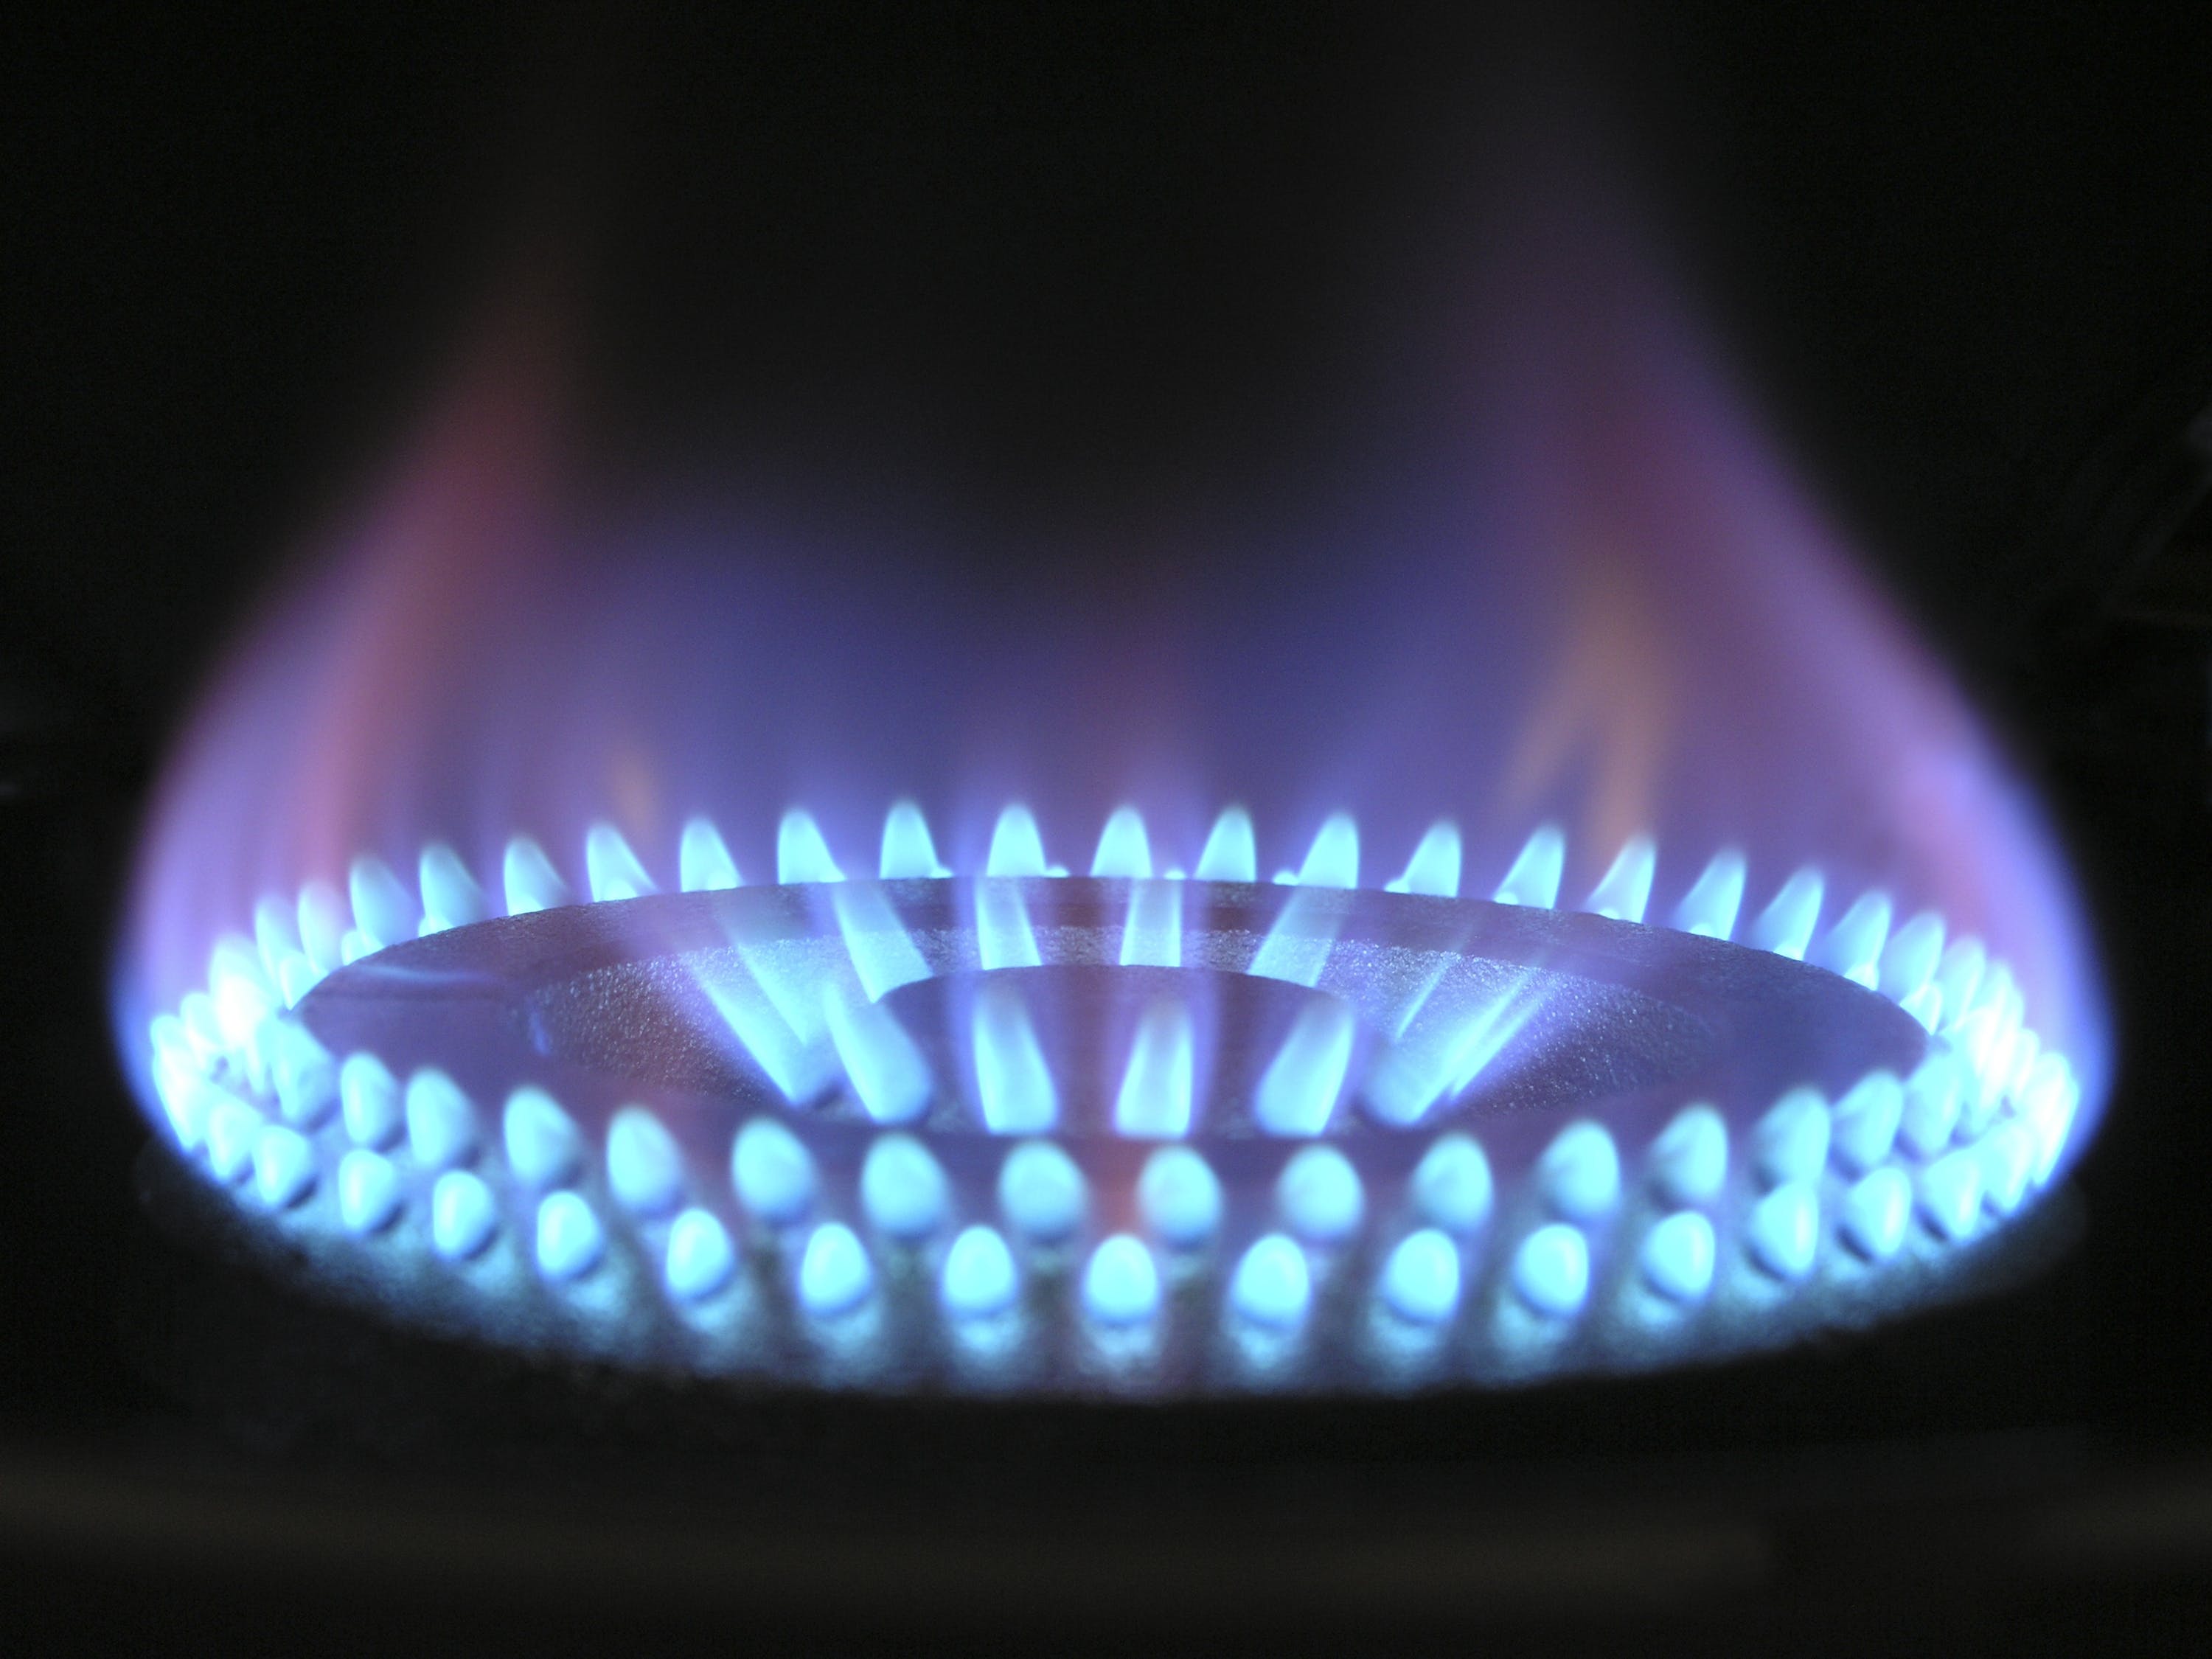 Planned Gas Price Increase in Hungary Condemned by DK